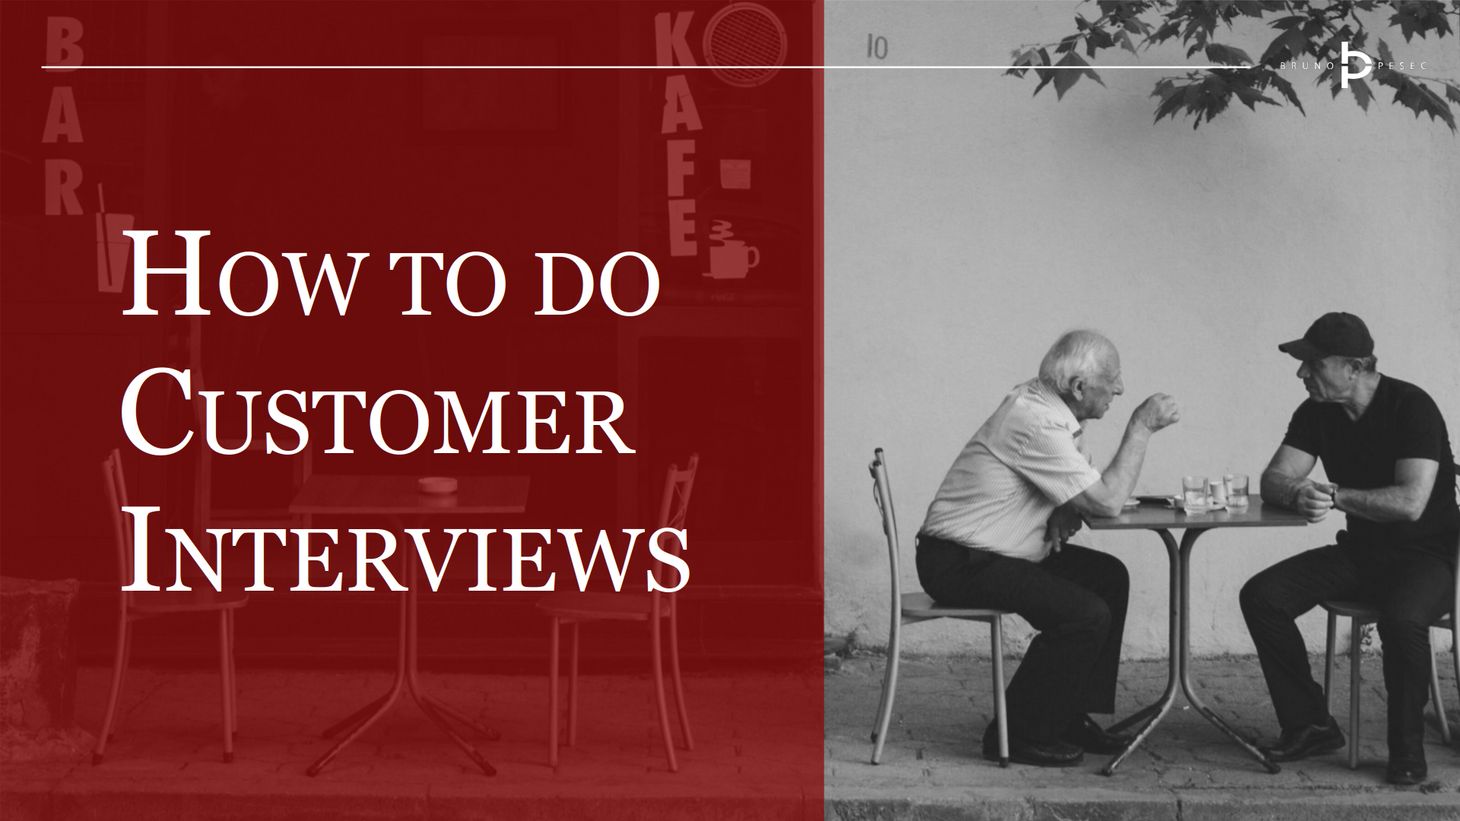 How to do customer interviews